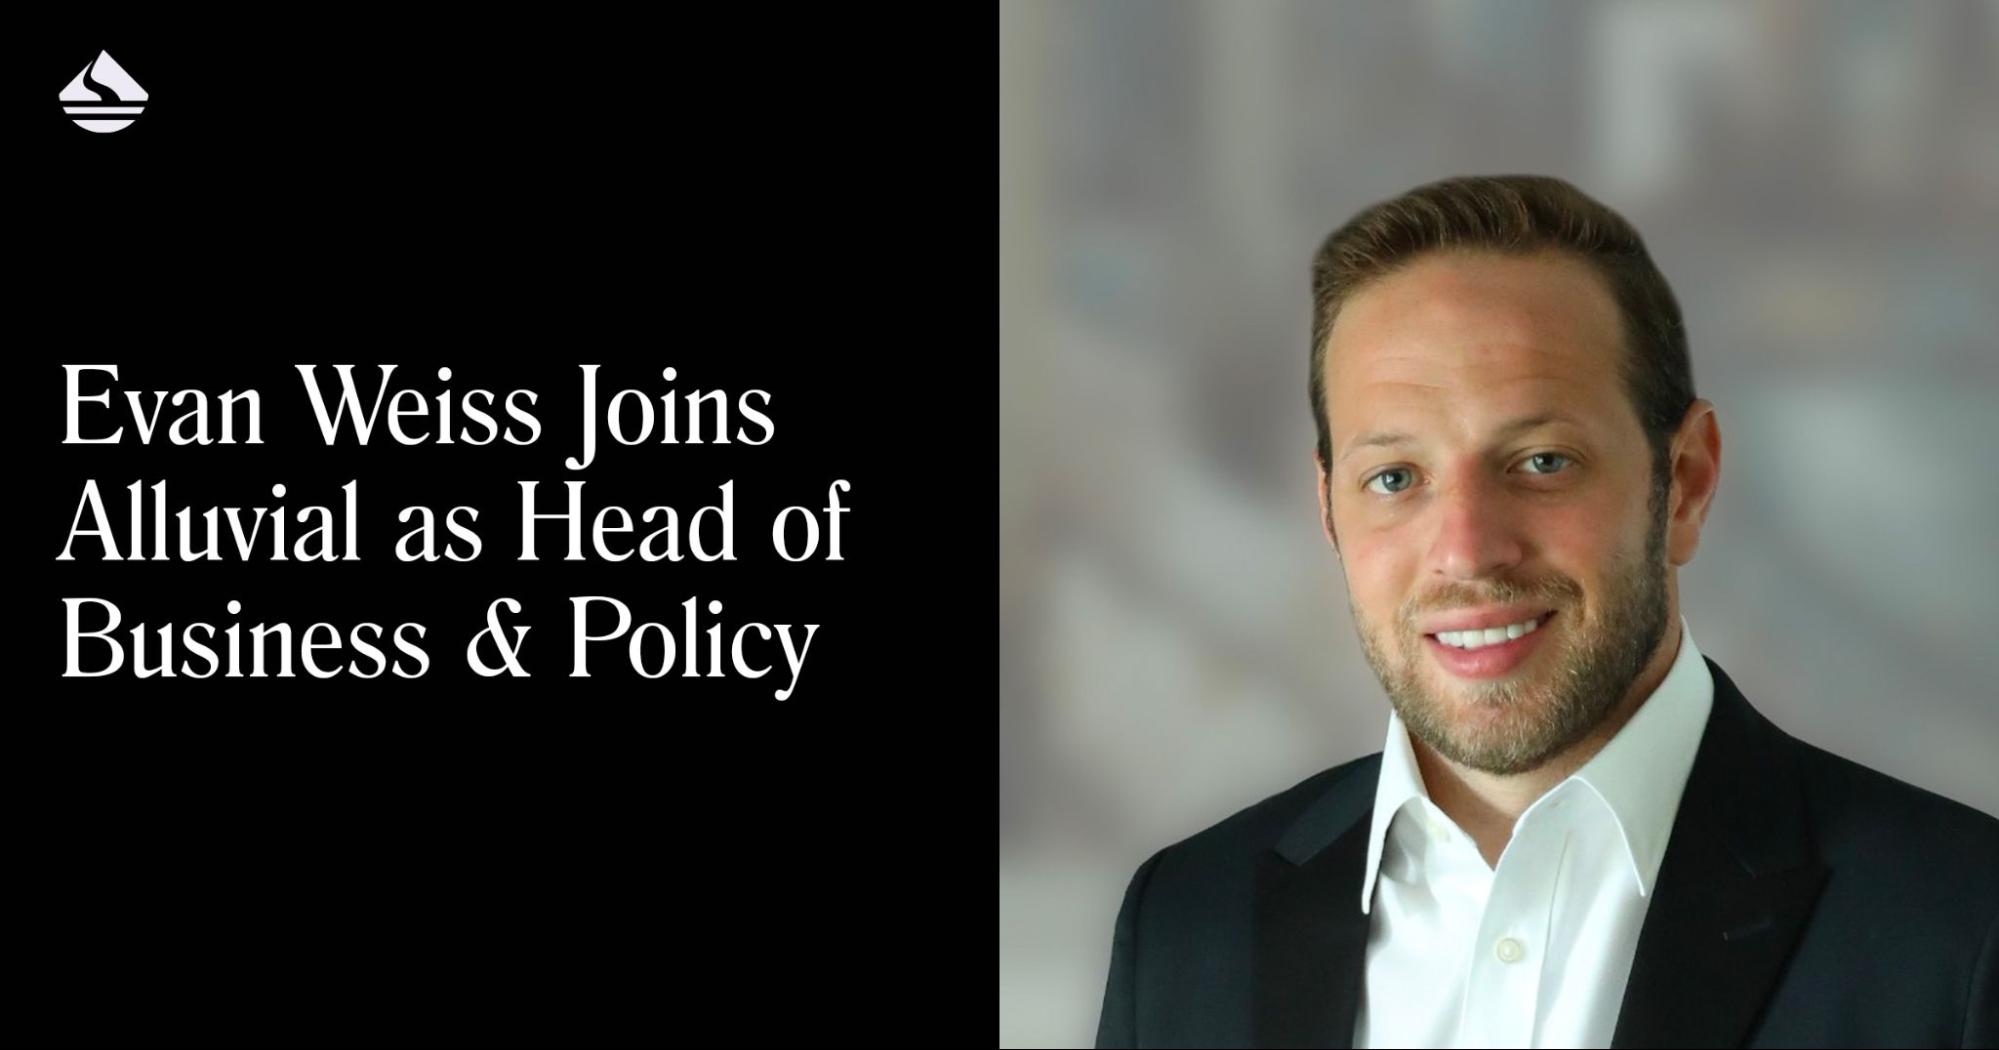 Evan Weiss Joins Alluvial as Head of Business & Policy